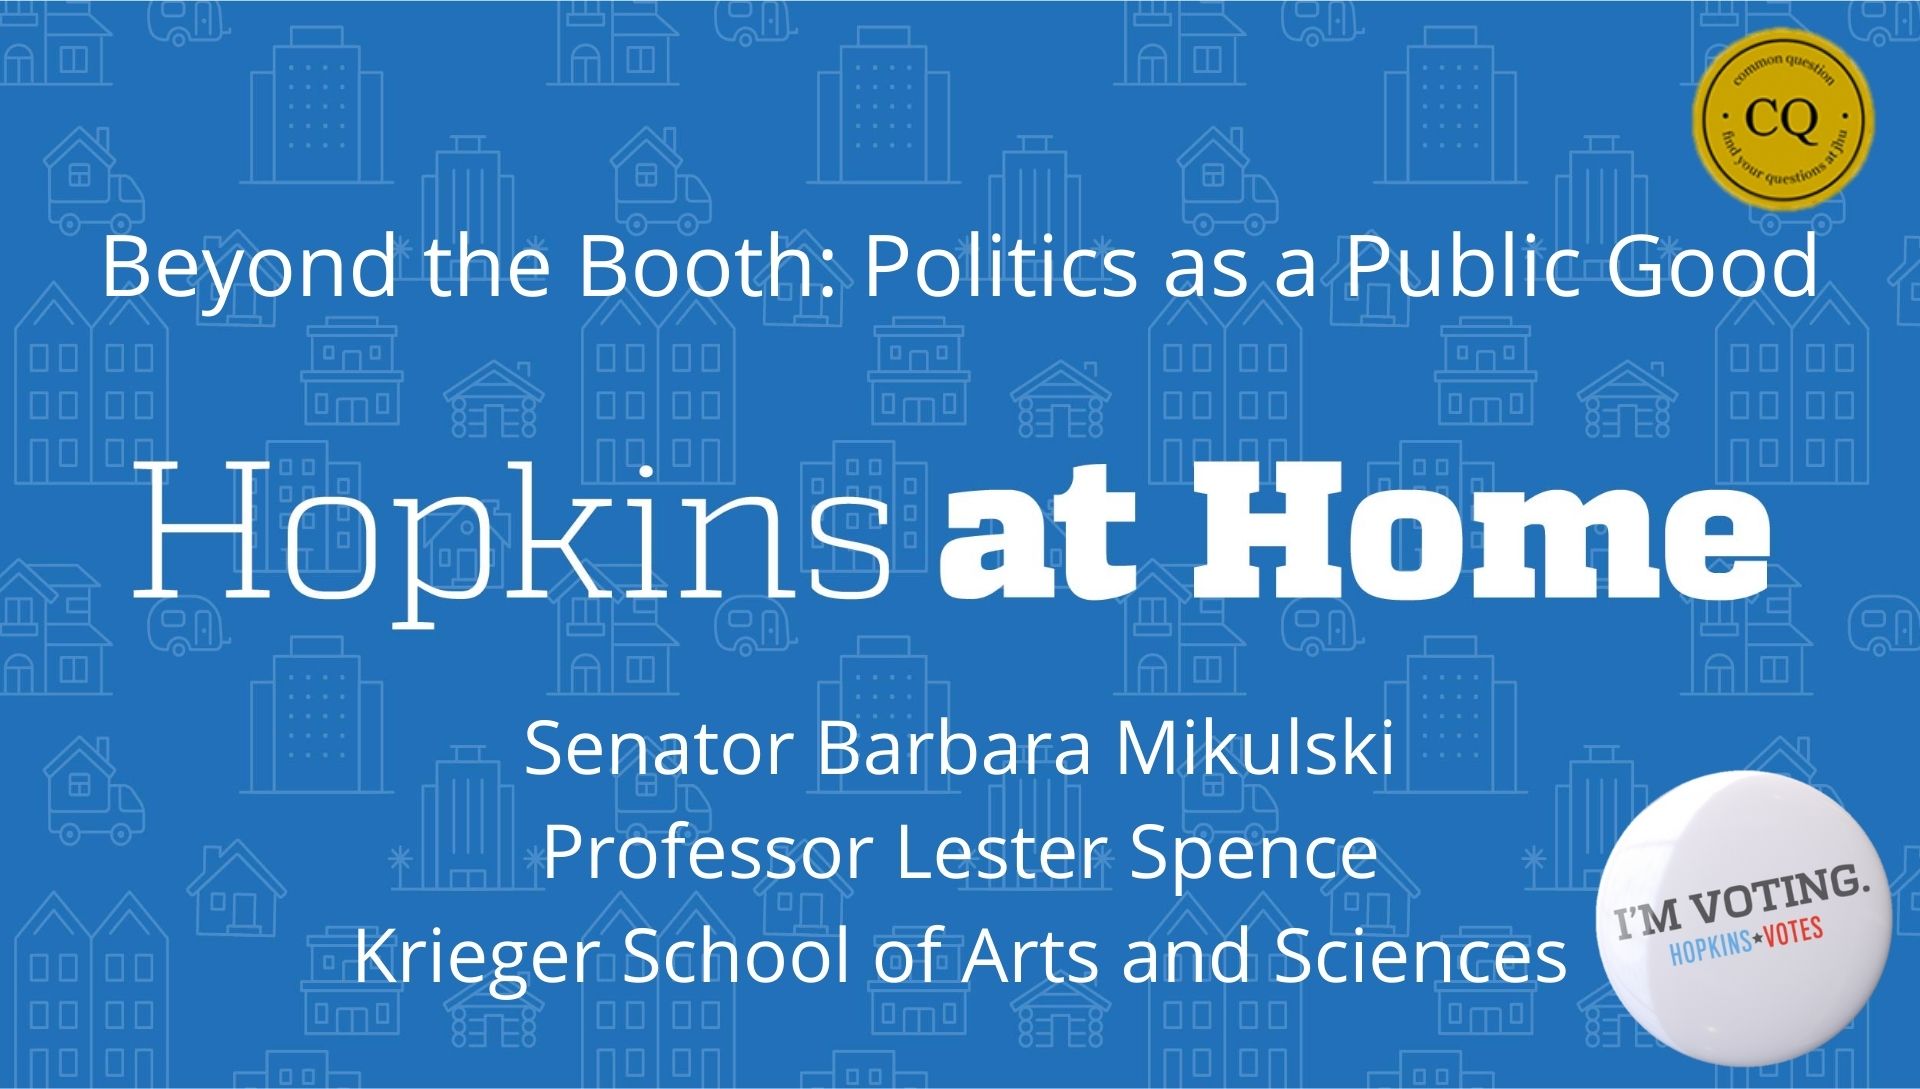 Beyond the Booth: Politics as a Public Good